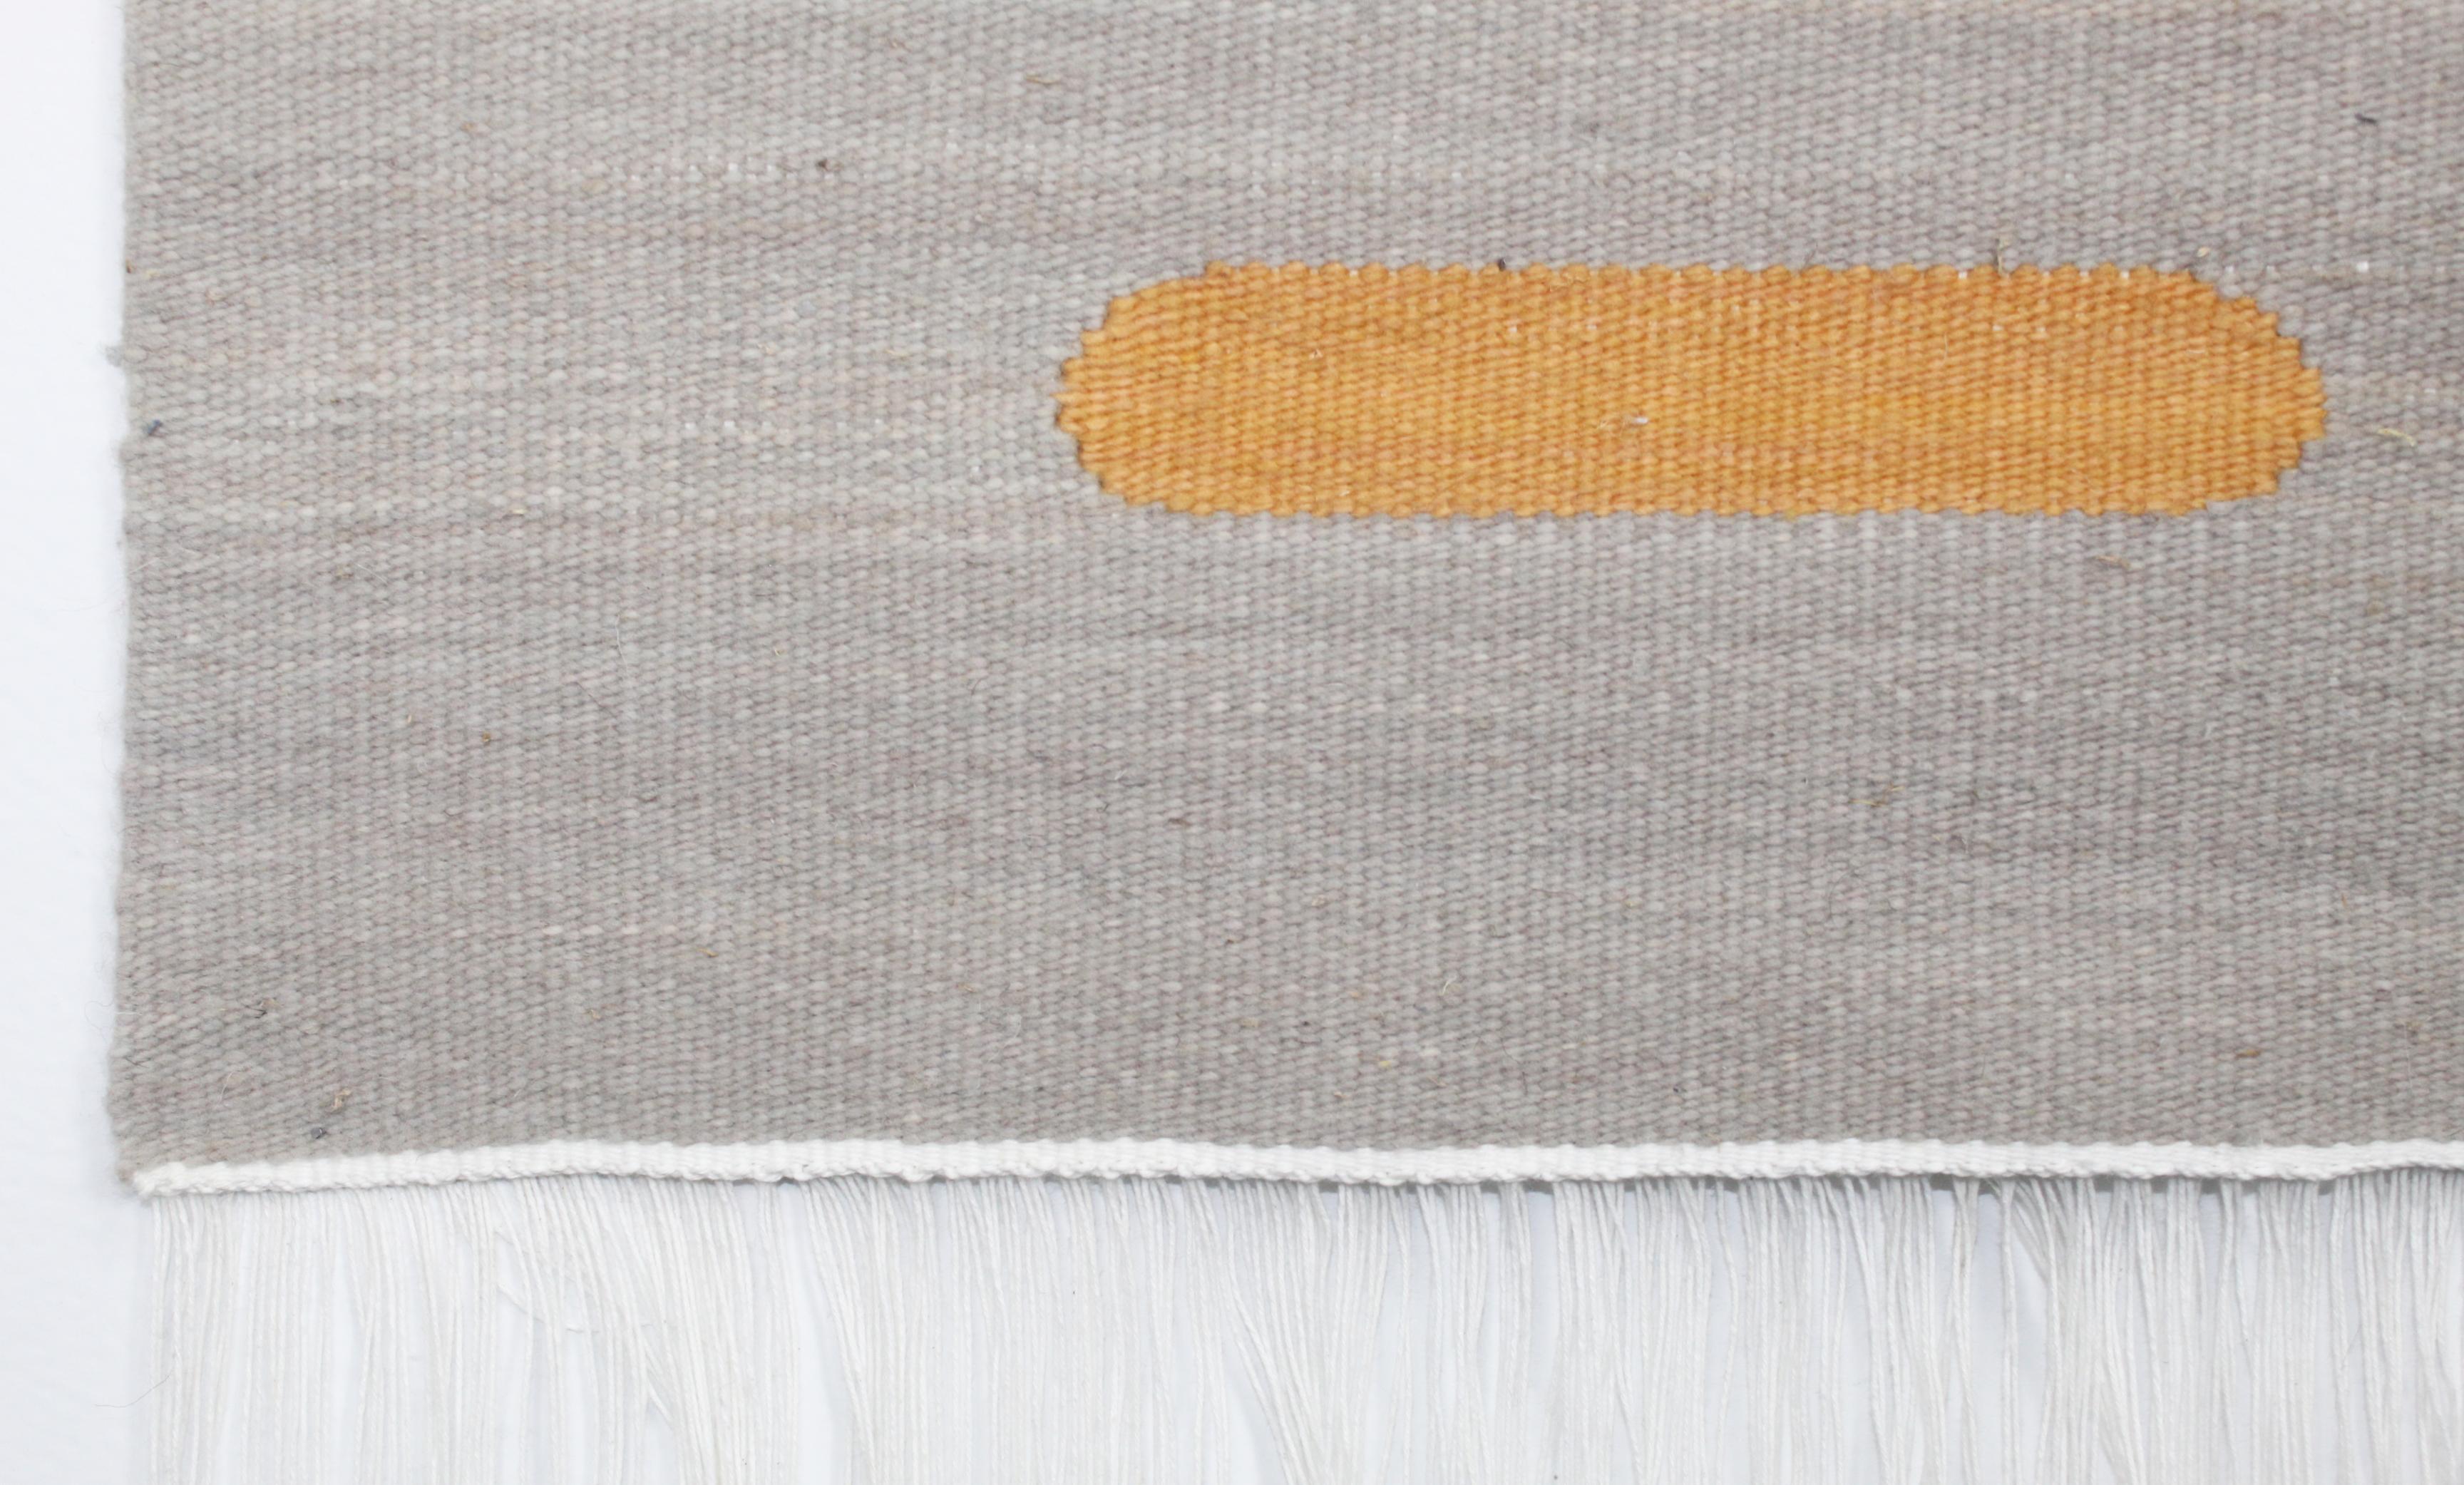 Modern Handwoven Wool Rug / Kilim, Grey, Coral and Sand, Natural Dye, by Andrew Boos